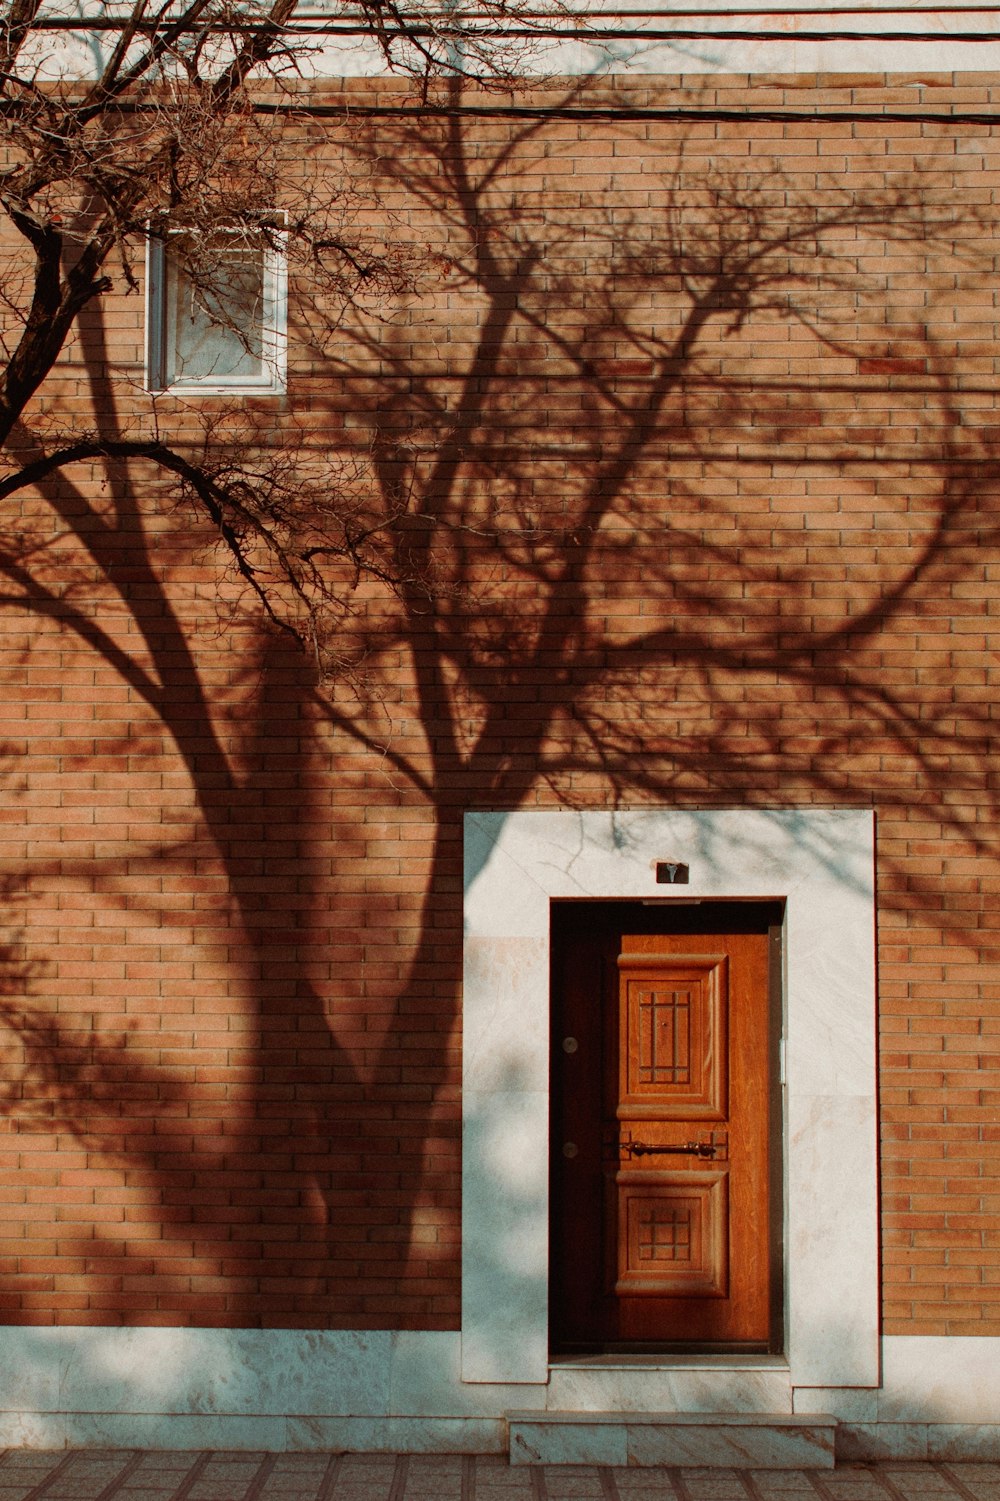 a tree casts a shadow on a brick building